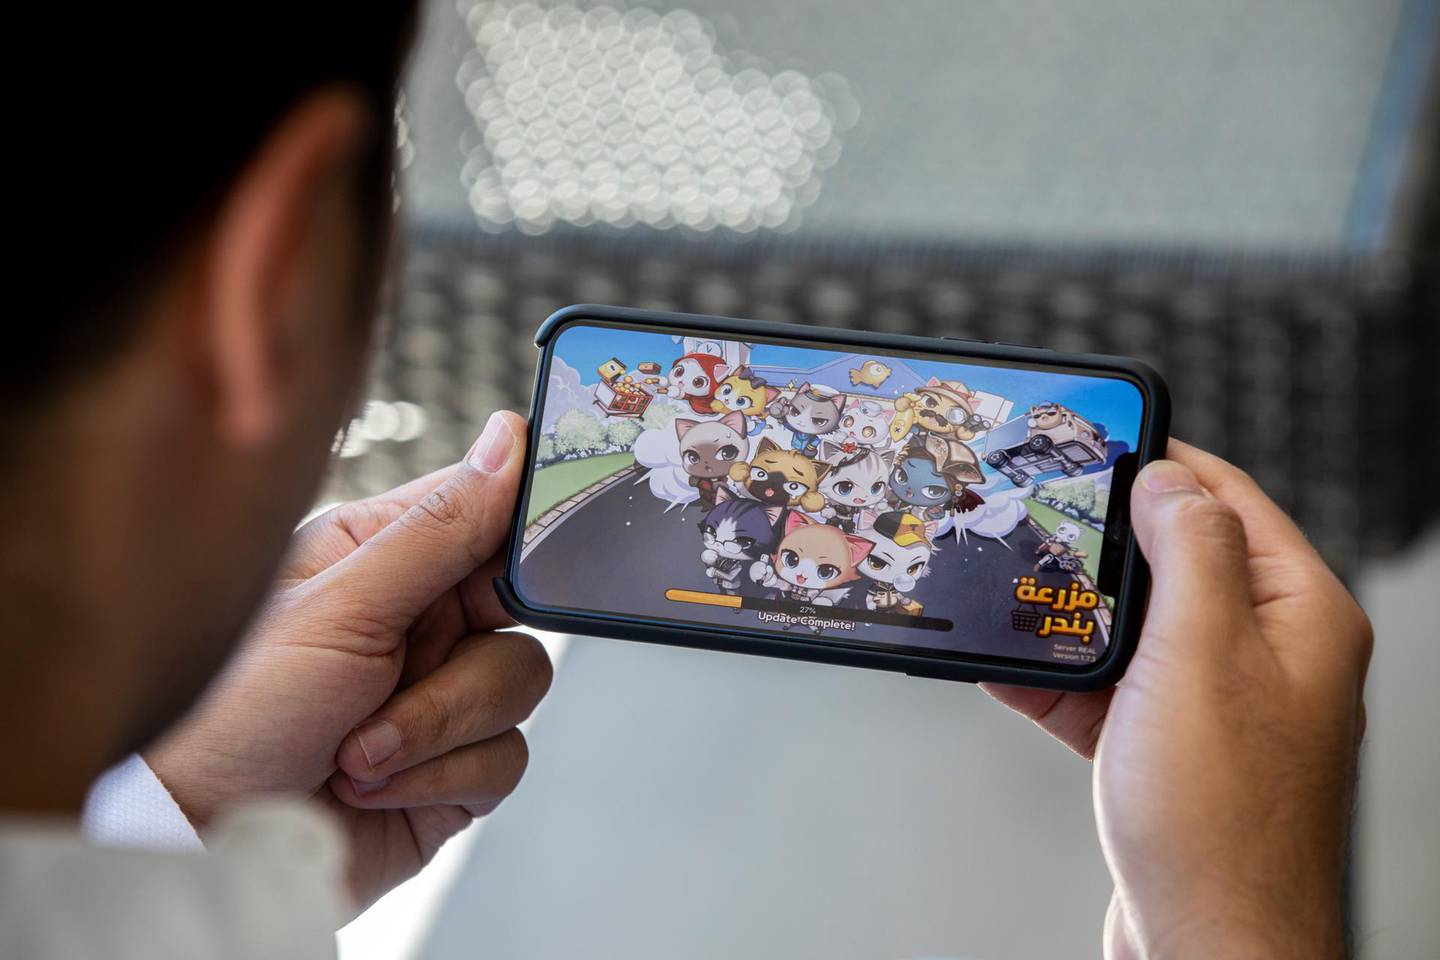 Jordanian Hussam Hammo, Founder and Chief Executive of Tamatem,an Arabic video games publisher plays on one of his games at his home office in Amman, Jordan, 24 June 2020.